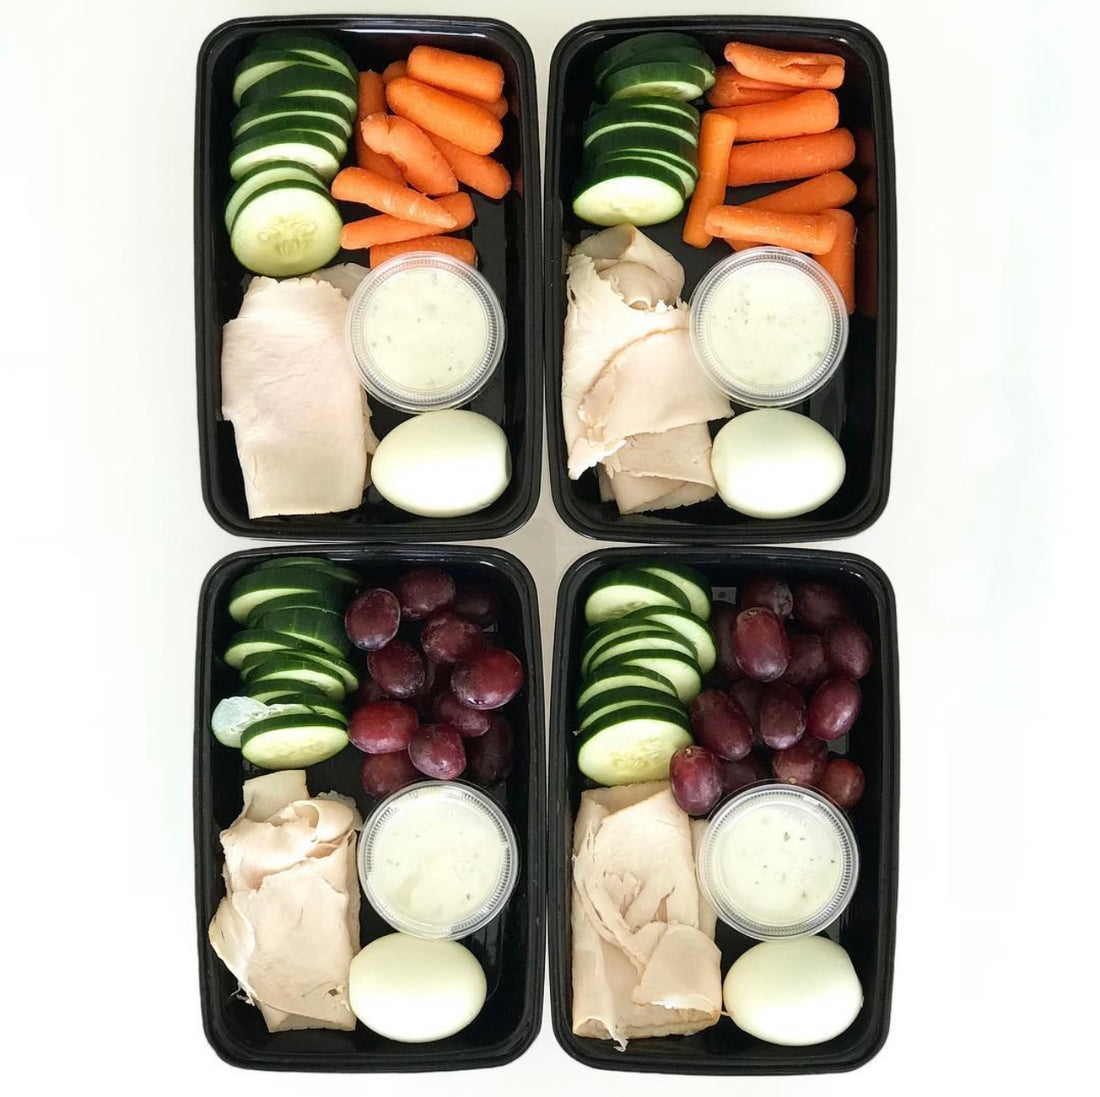 Snack box with hard-boiled egg and turkey